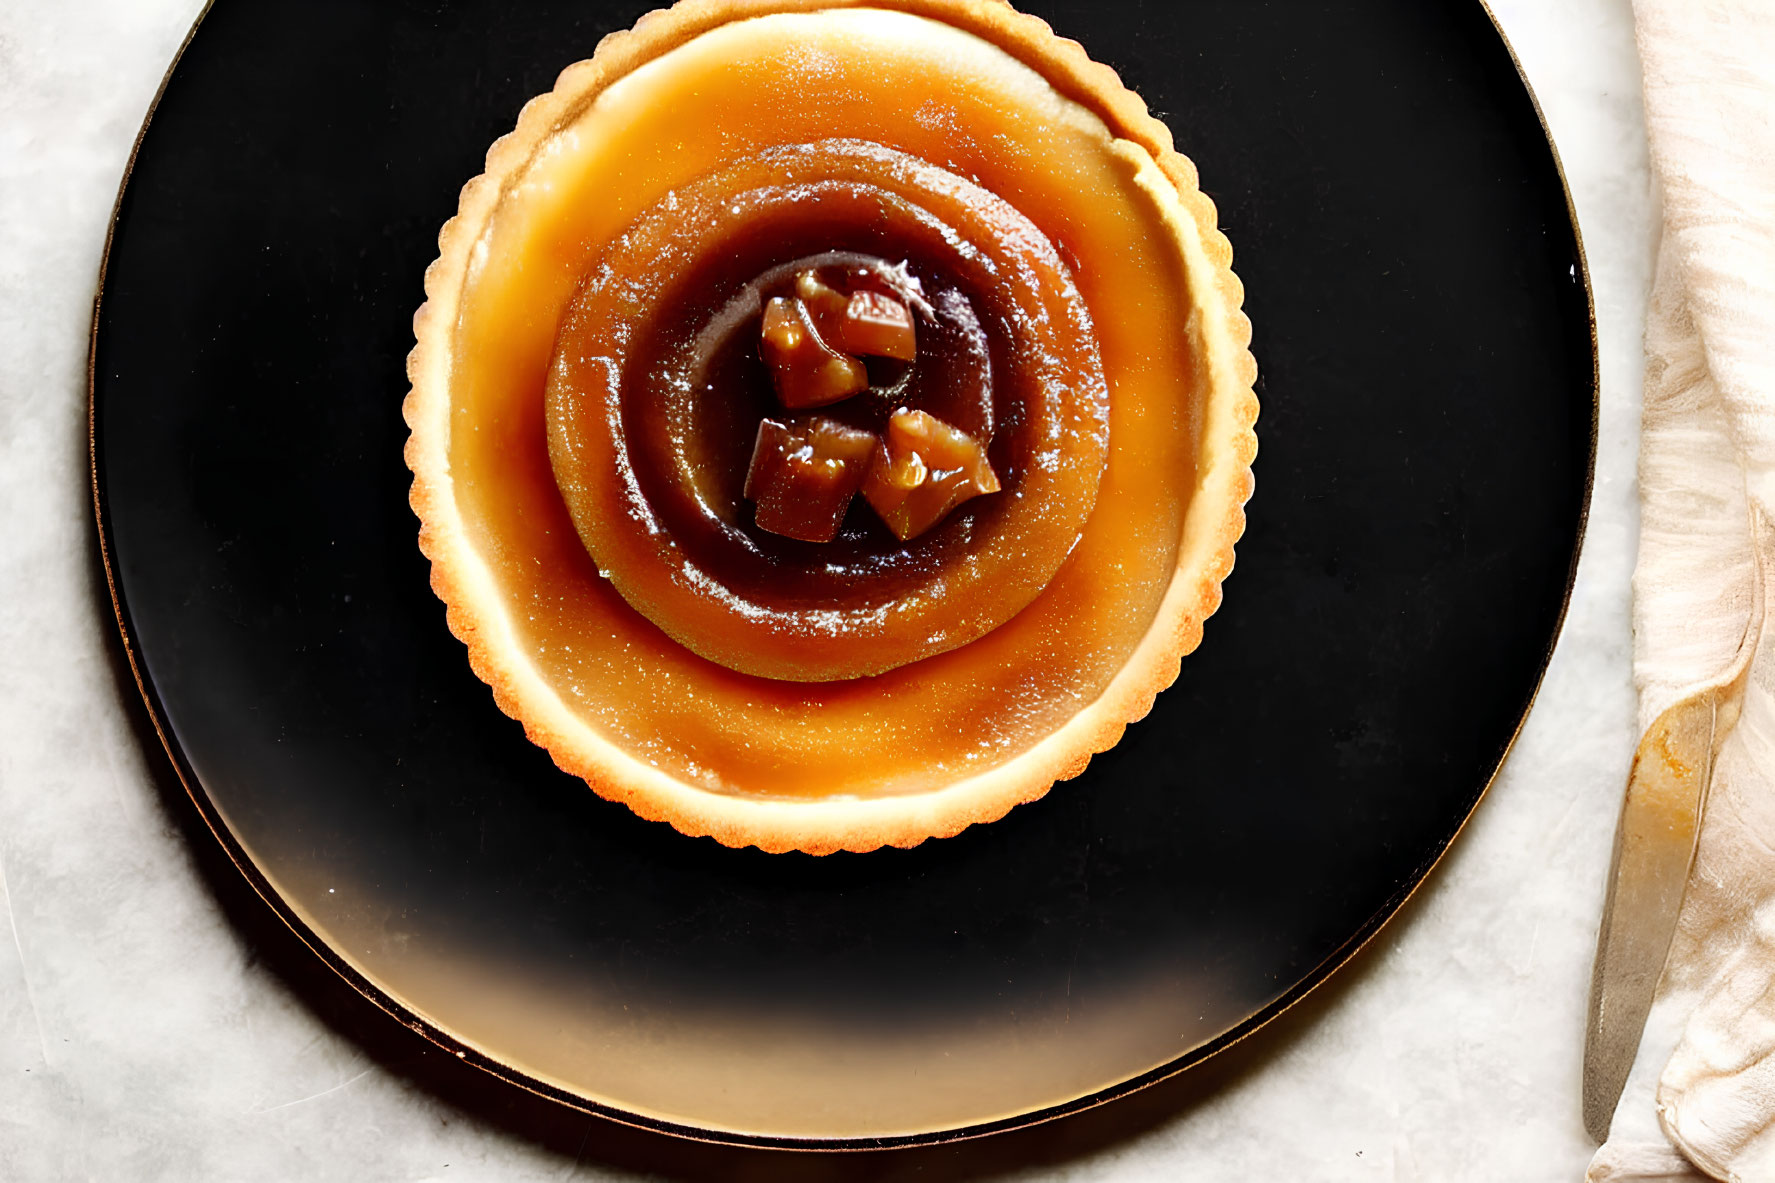 Caramel Tart with Fluted Edge on Black Plate